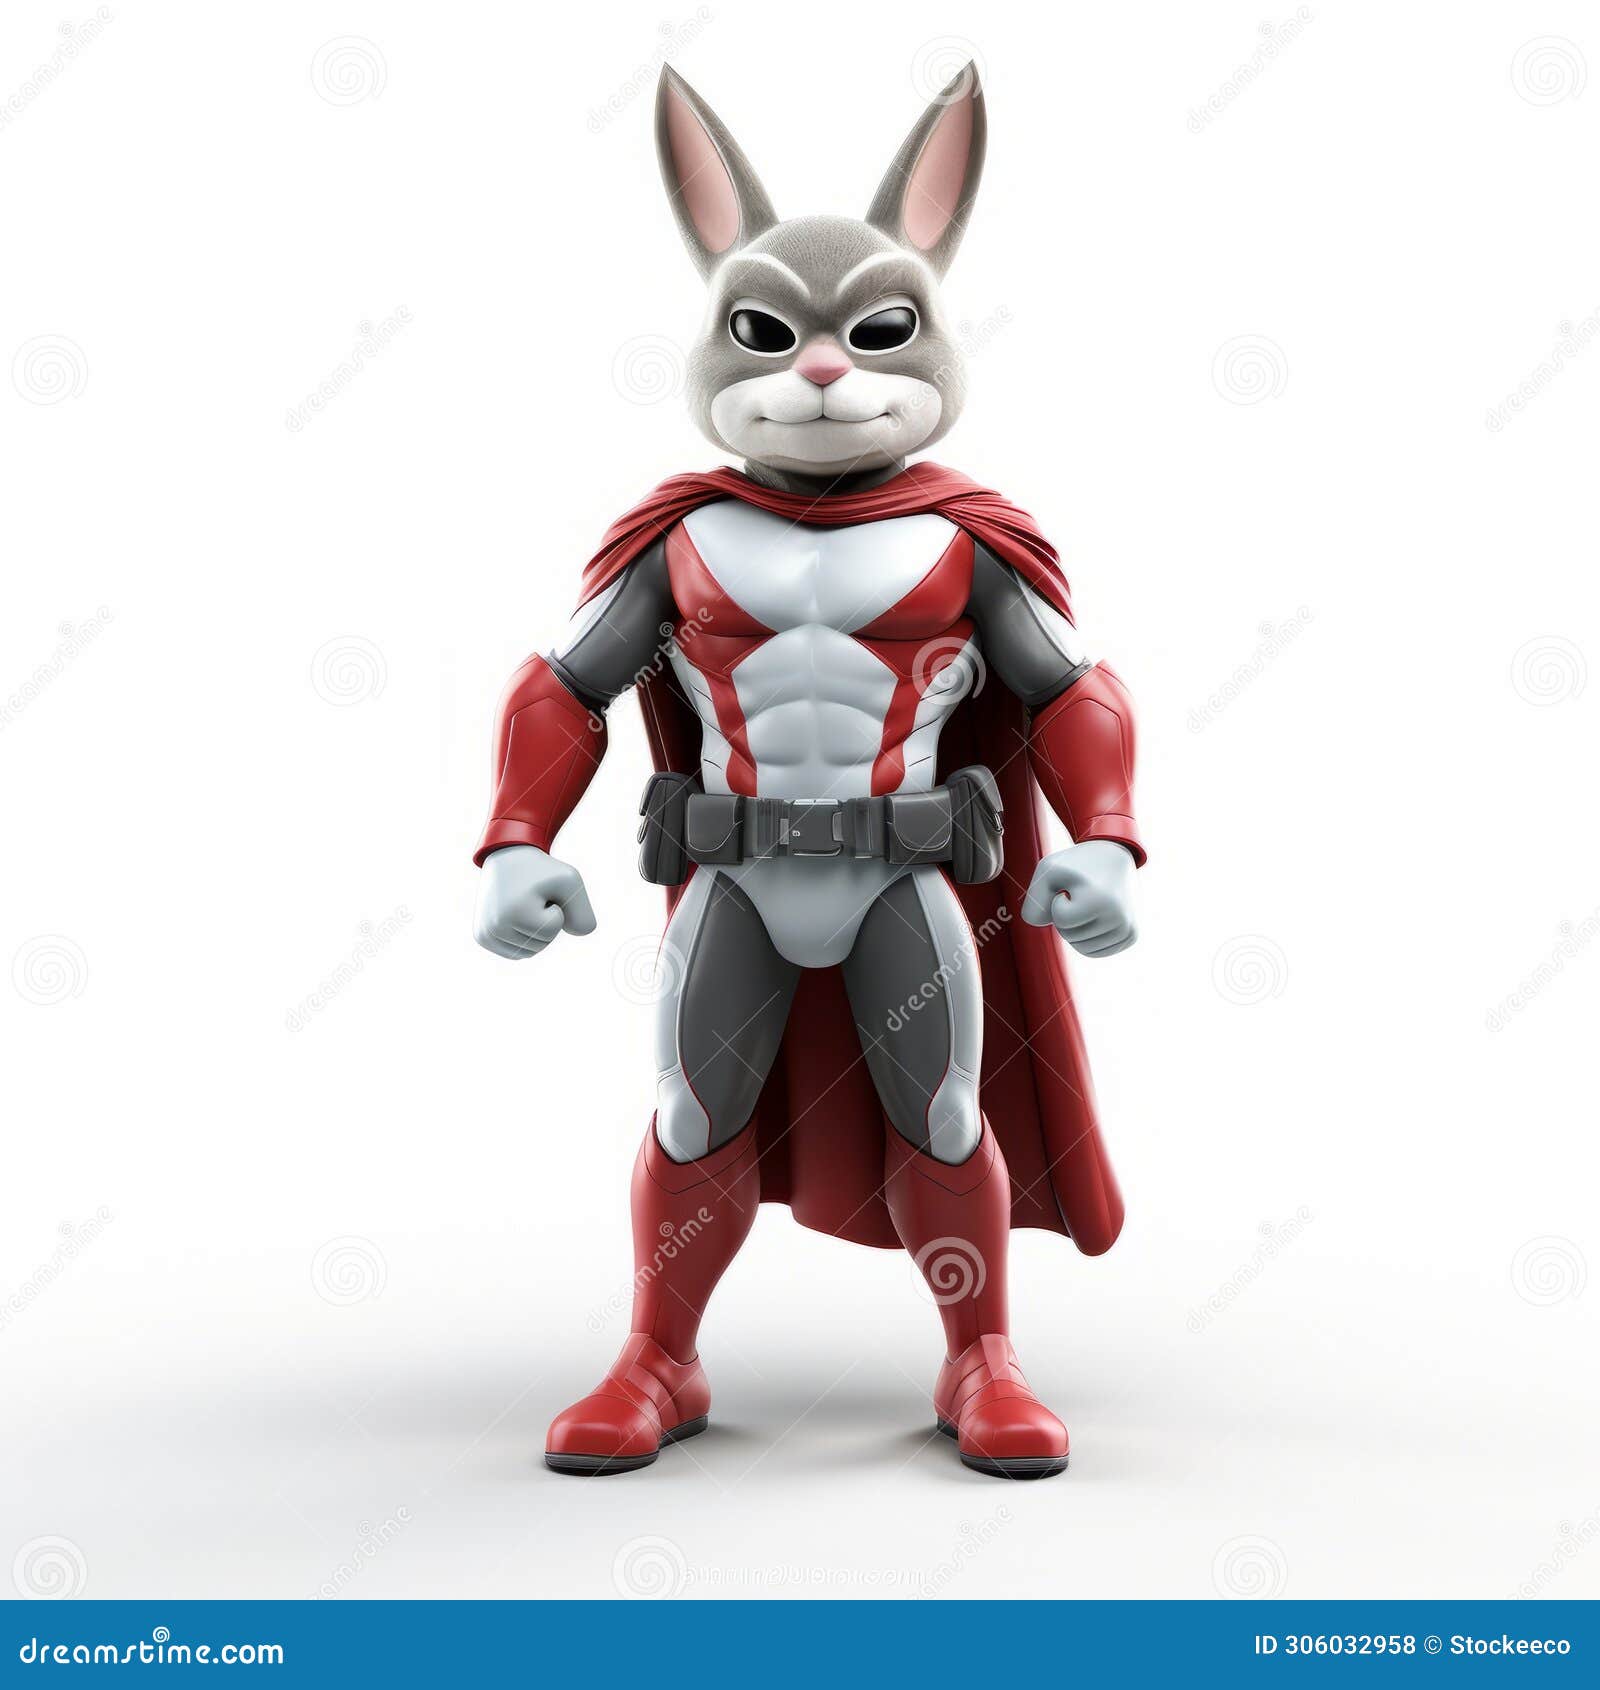 superhero rabbit 3d rendering - red and gray style